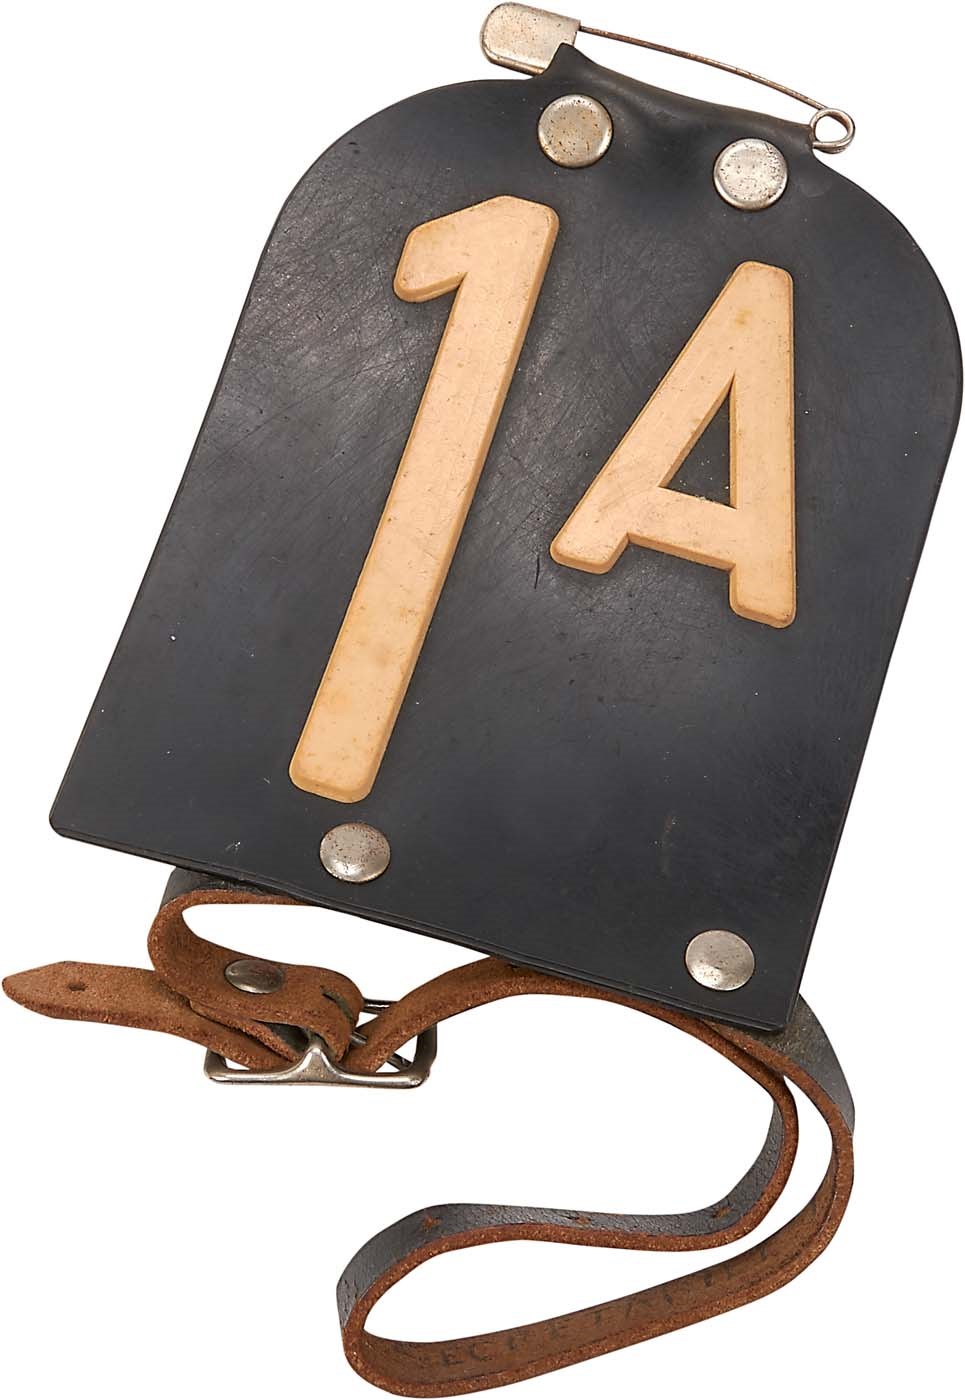 Horse Racing - ​1973 Secretariat Kentucky Derby Armband Worn by Ron Turcotte (Photo-Matched)​